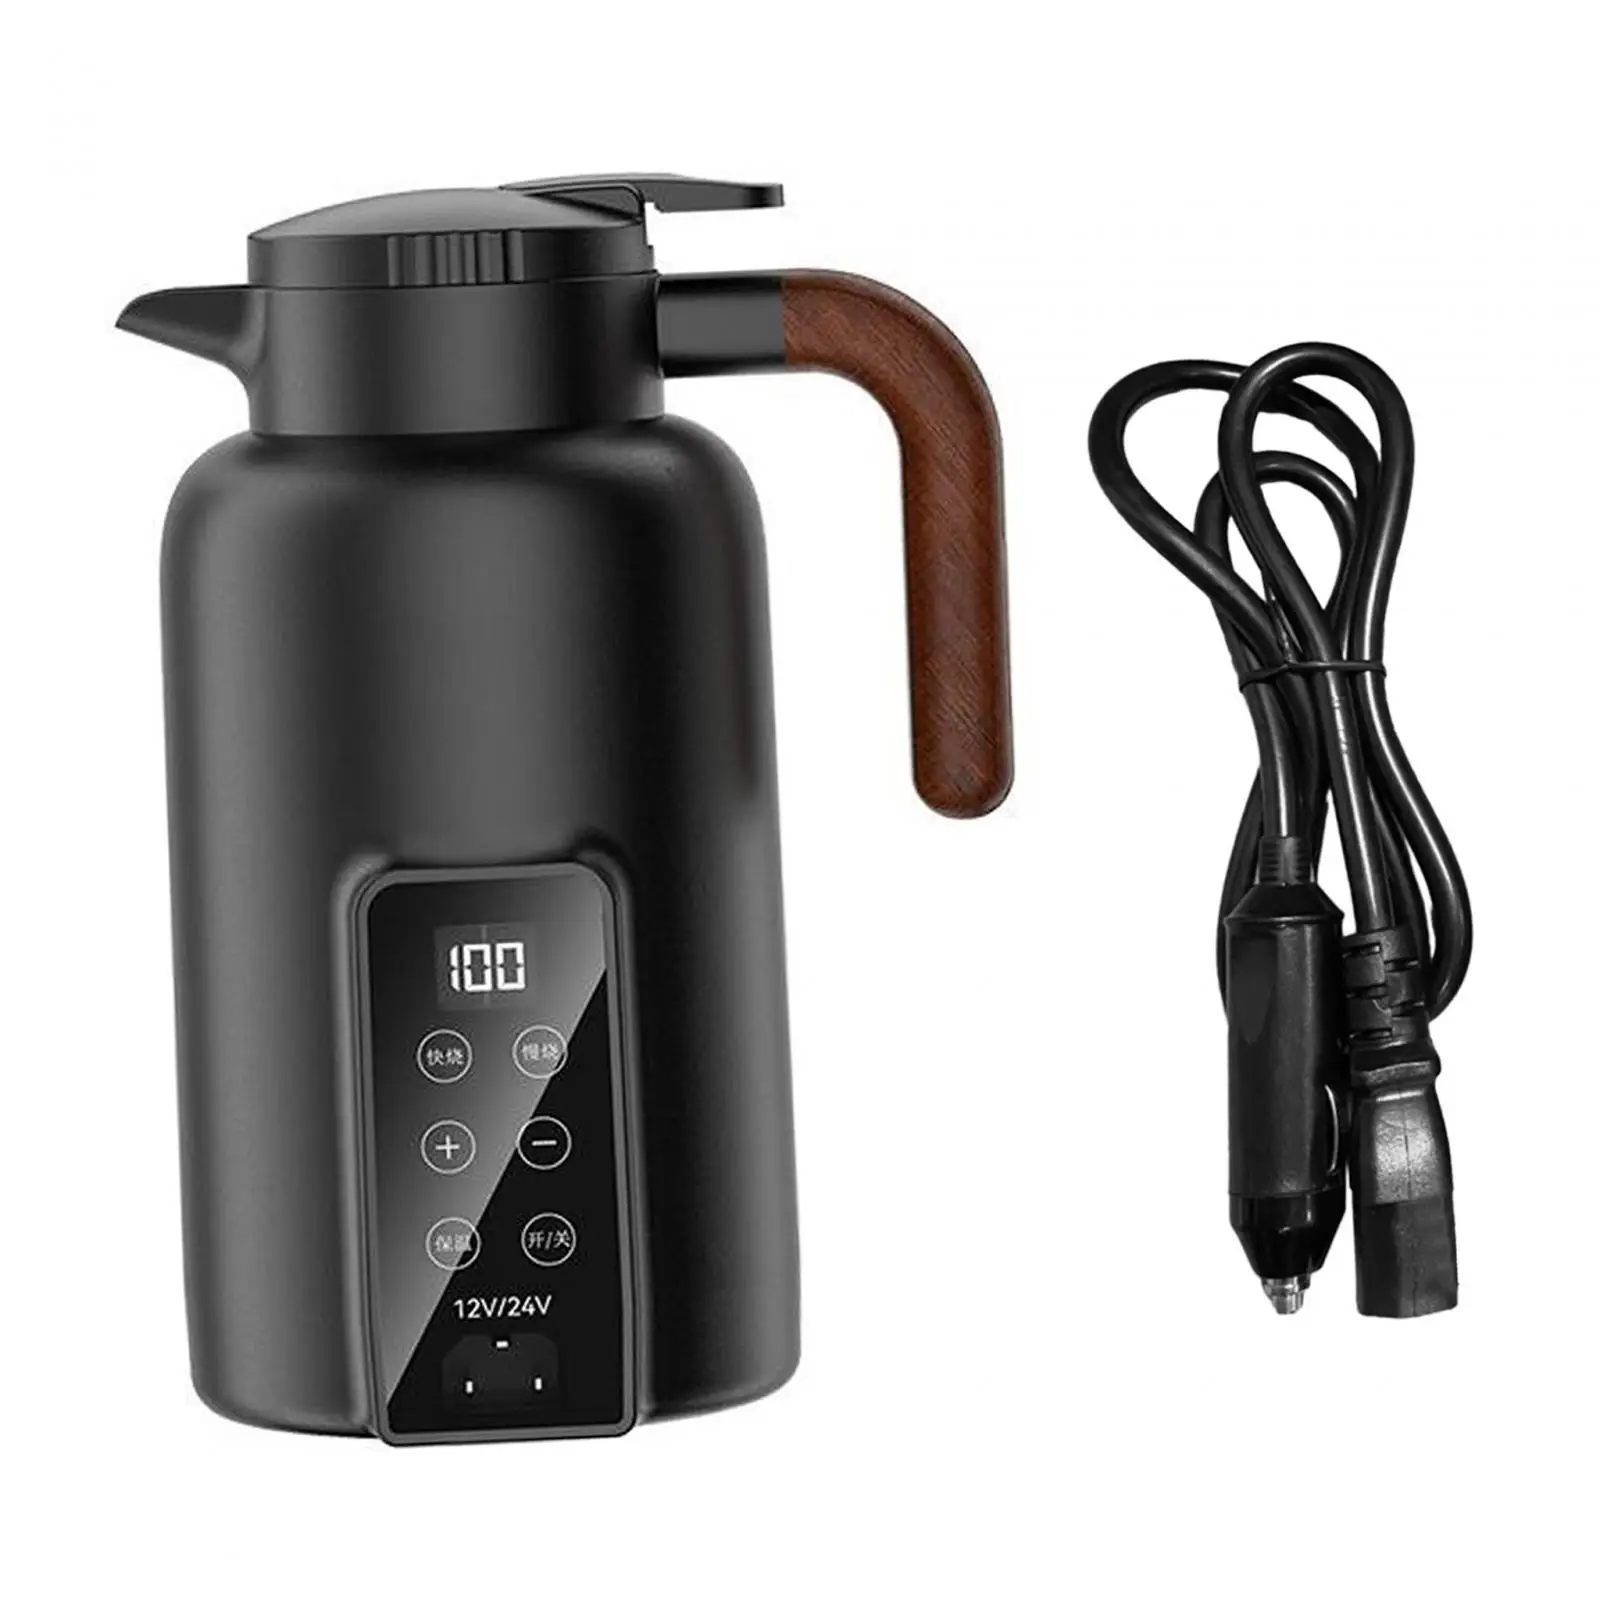 Car Heating Cup 304 Stainless Steel Travel Mug Electric Heat Water Cup for Tea Heating Water Beverage Milk Heated Camping